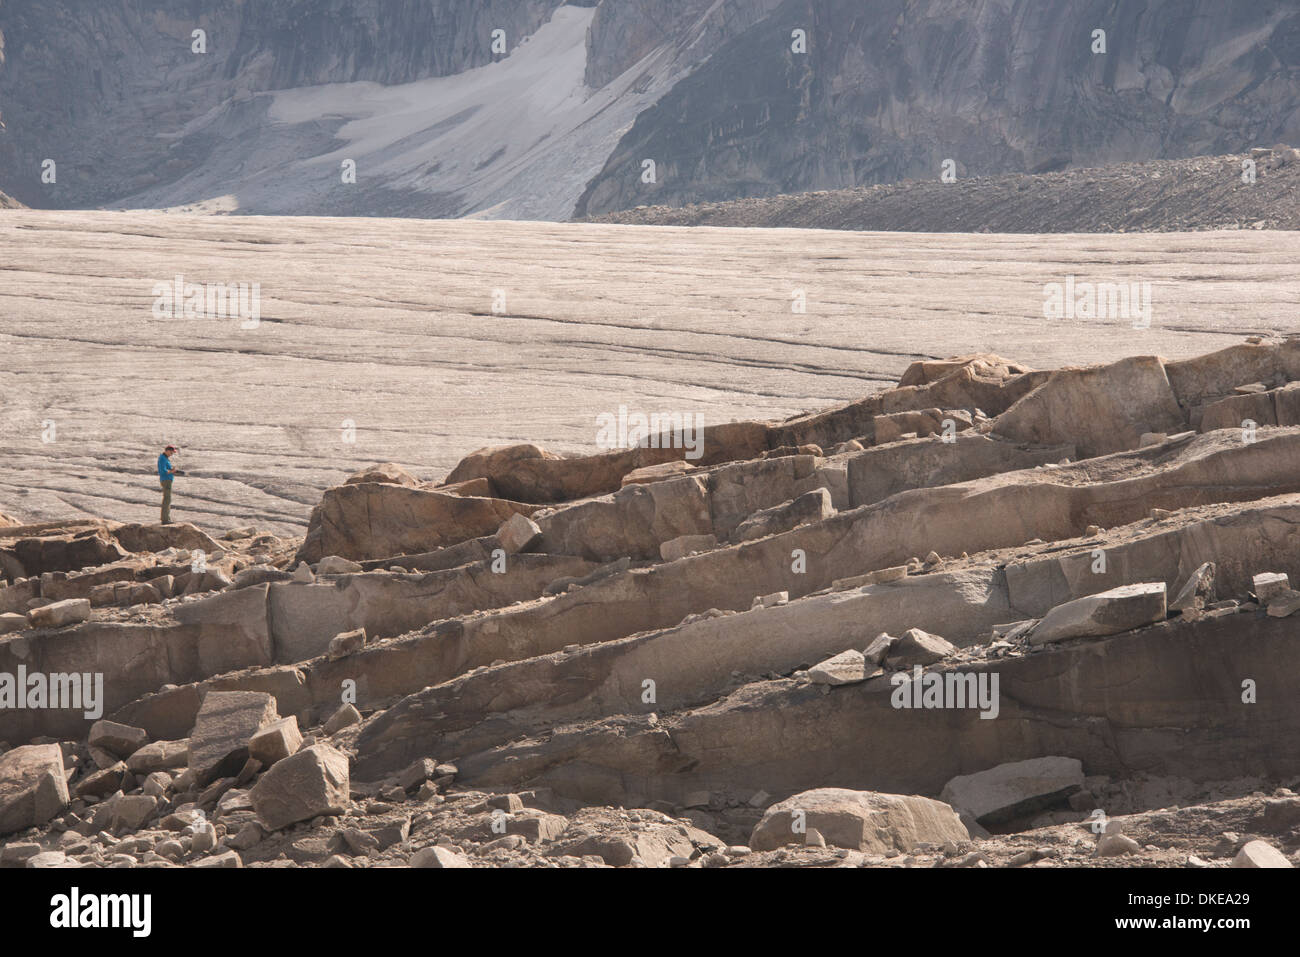 A lone figure contemplates the massive geological formations and ice at the foot of the Vowell Glacier in the mountains Stock Photo